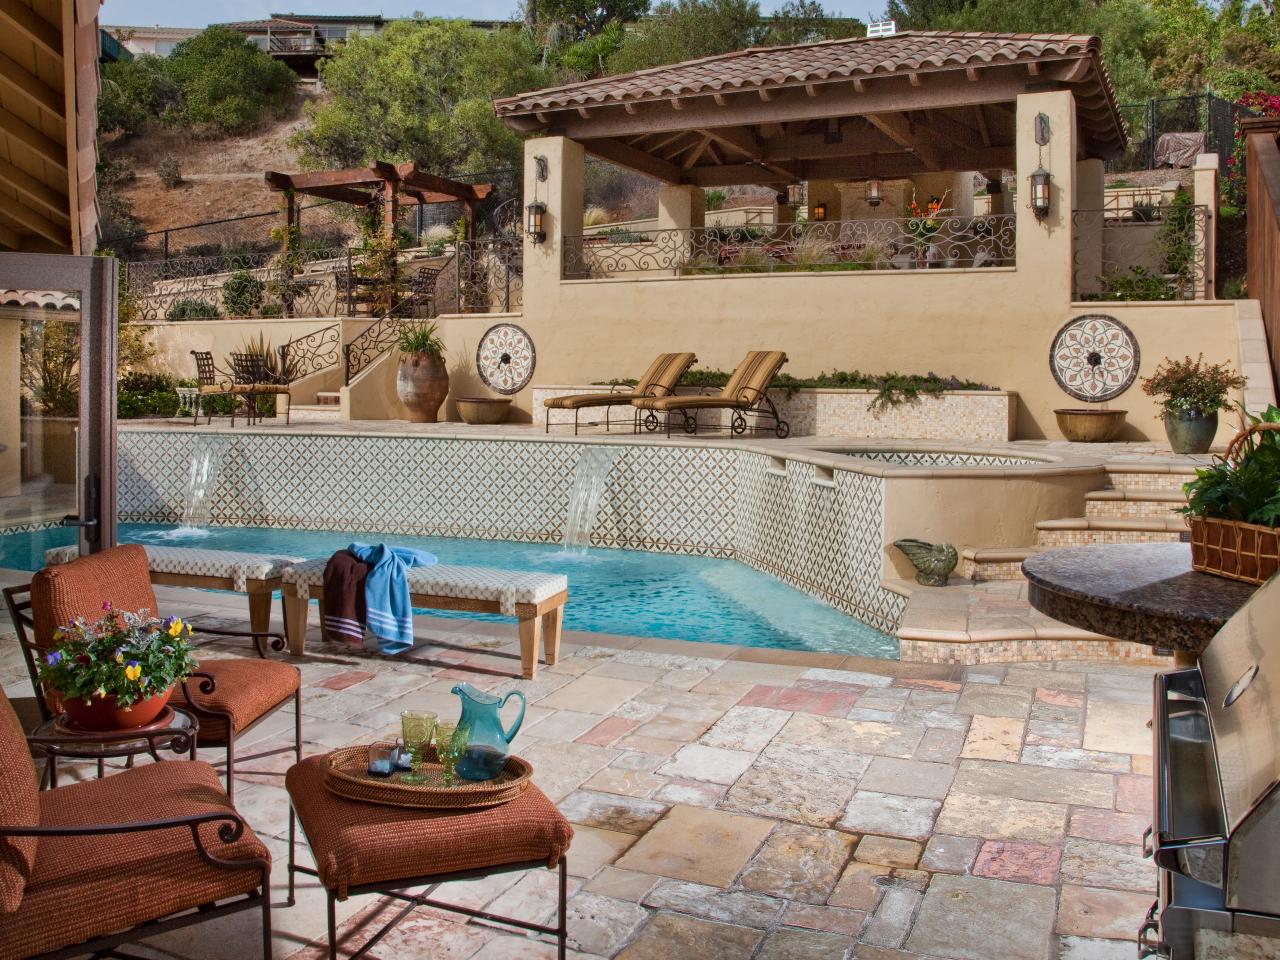 From Patios to Pools: The Best Outdoor Living Space Ideas